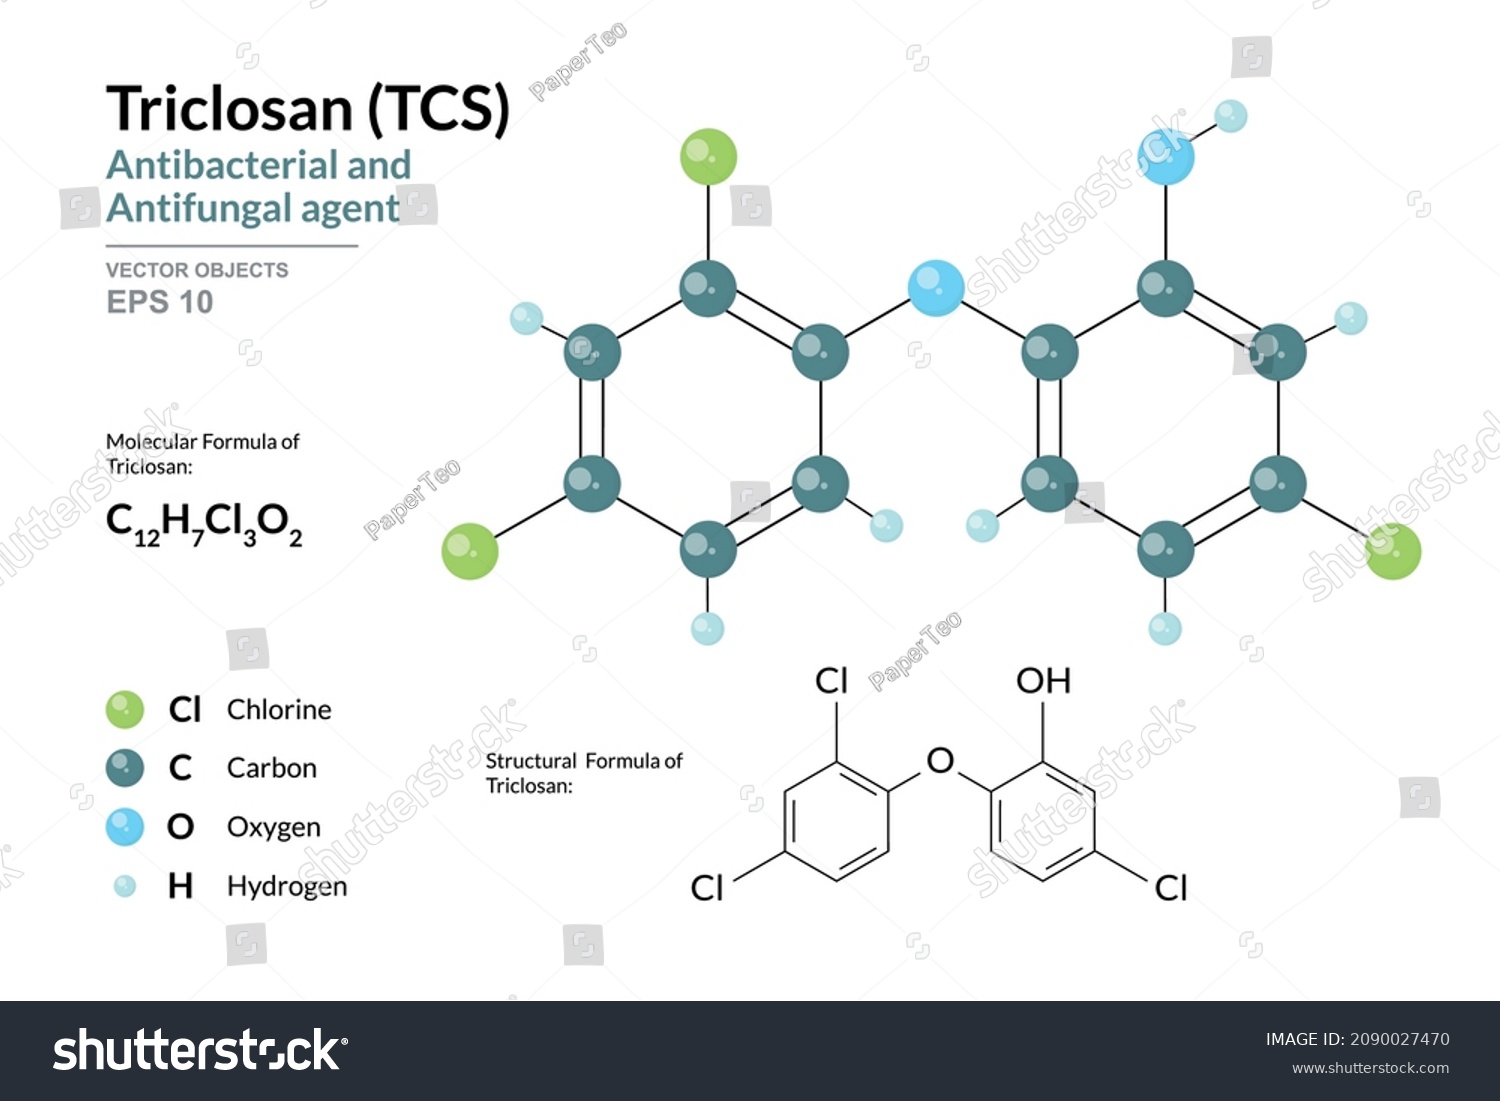 SVG of Triclosan. TCS. Antibacterial and Antifungal agent. Antiseptic. Pesticide. Structural Chemical Formula and Molecule 3d Model. C12H7Cl3O2. Atoms with Color Coding. Vector Illustration  svg